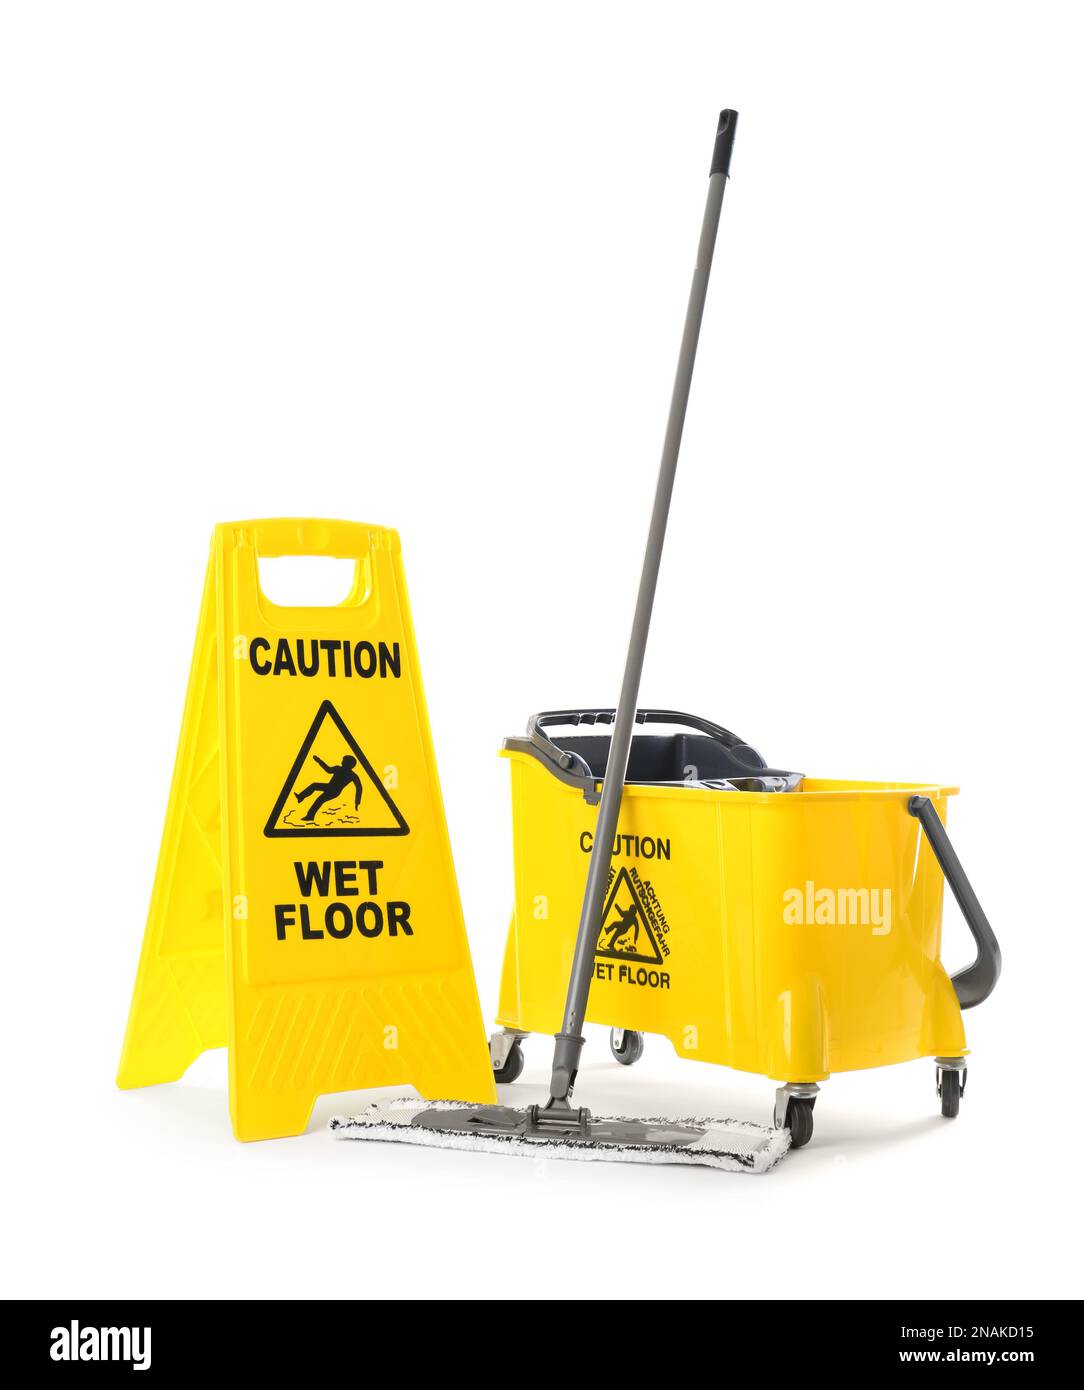 https://c8.alamy.com/comp/2NAKD15/safety-sign-with-phrase-caution-wet-floor-mop-and-bucket-on-white-background-cleaning-service-2NAKD15.jpg